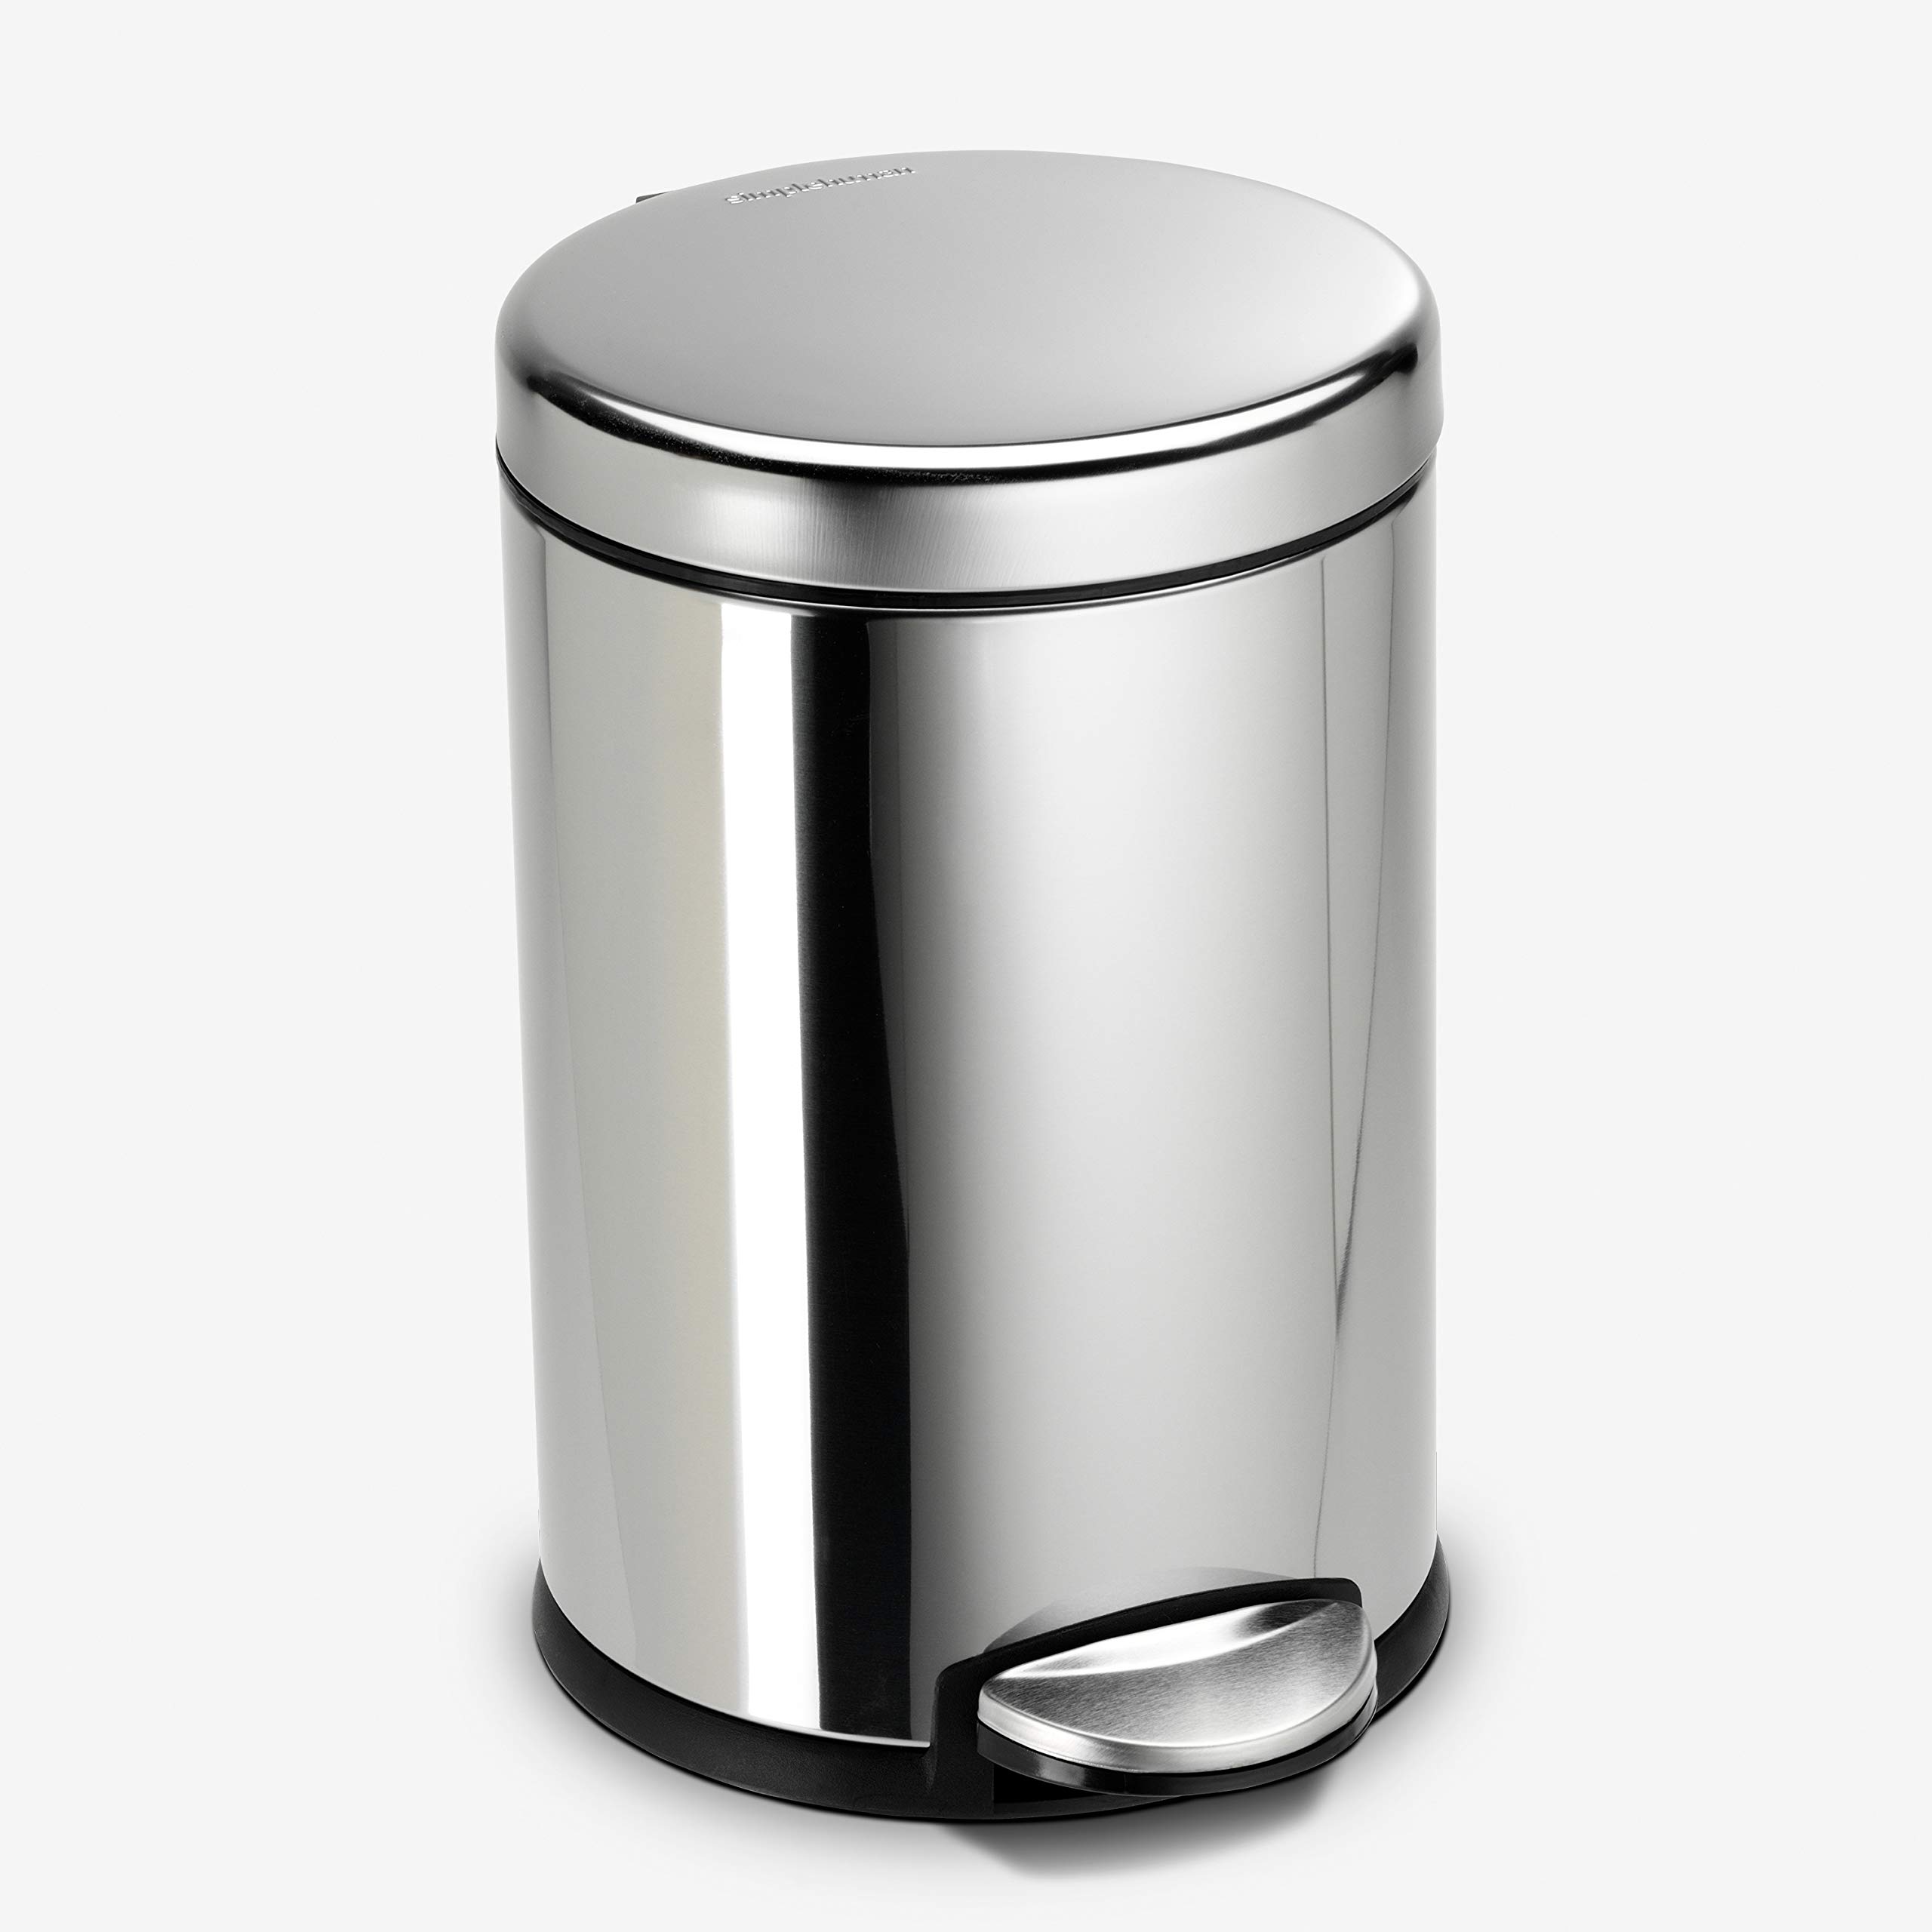 Book Cover simplehuman 4.5 Liter / 1.2 Gallon Round Bathroom Step Trash Can, Polished Stainless Steel